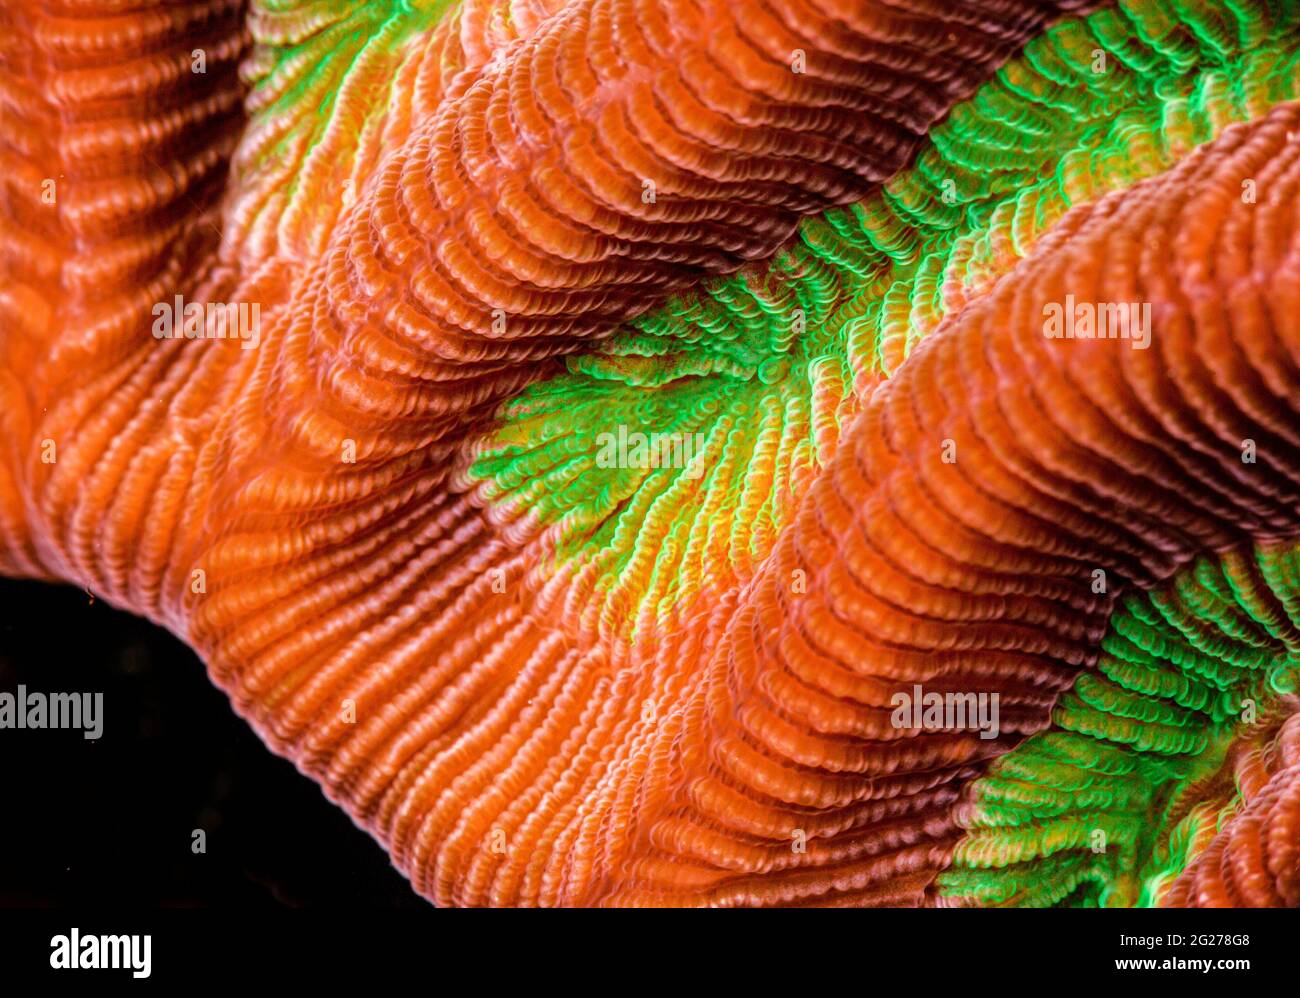 Colors and details of stony coral (Scleractinia). Stock Photo